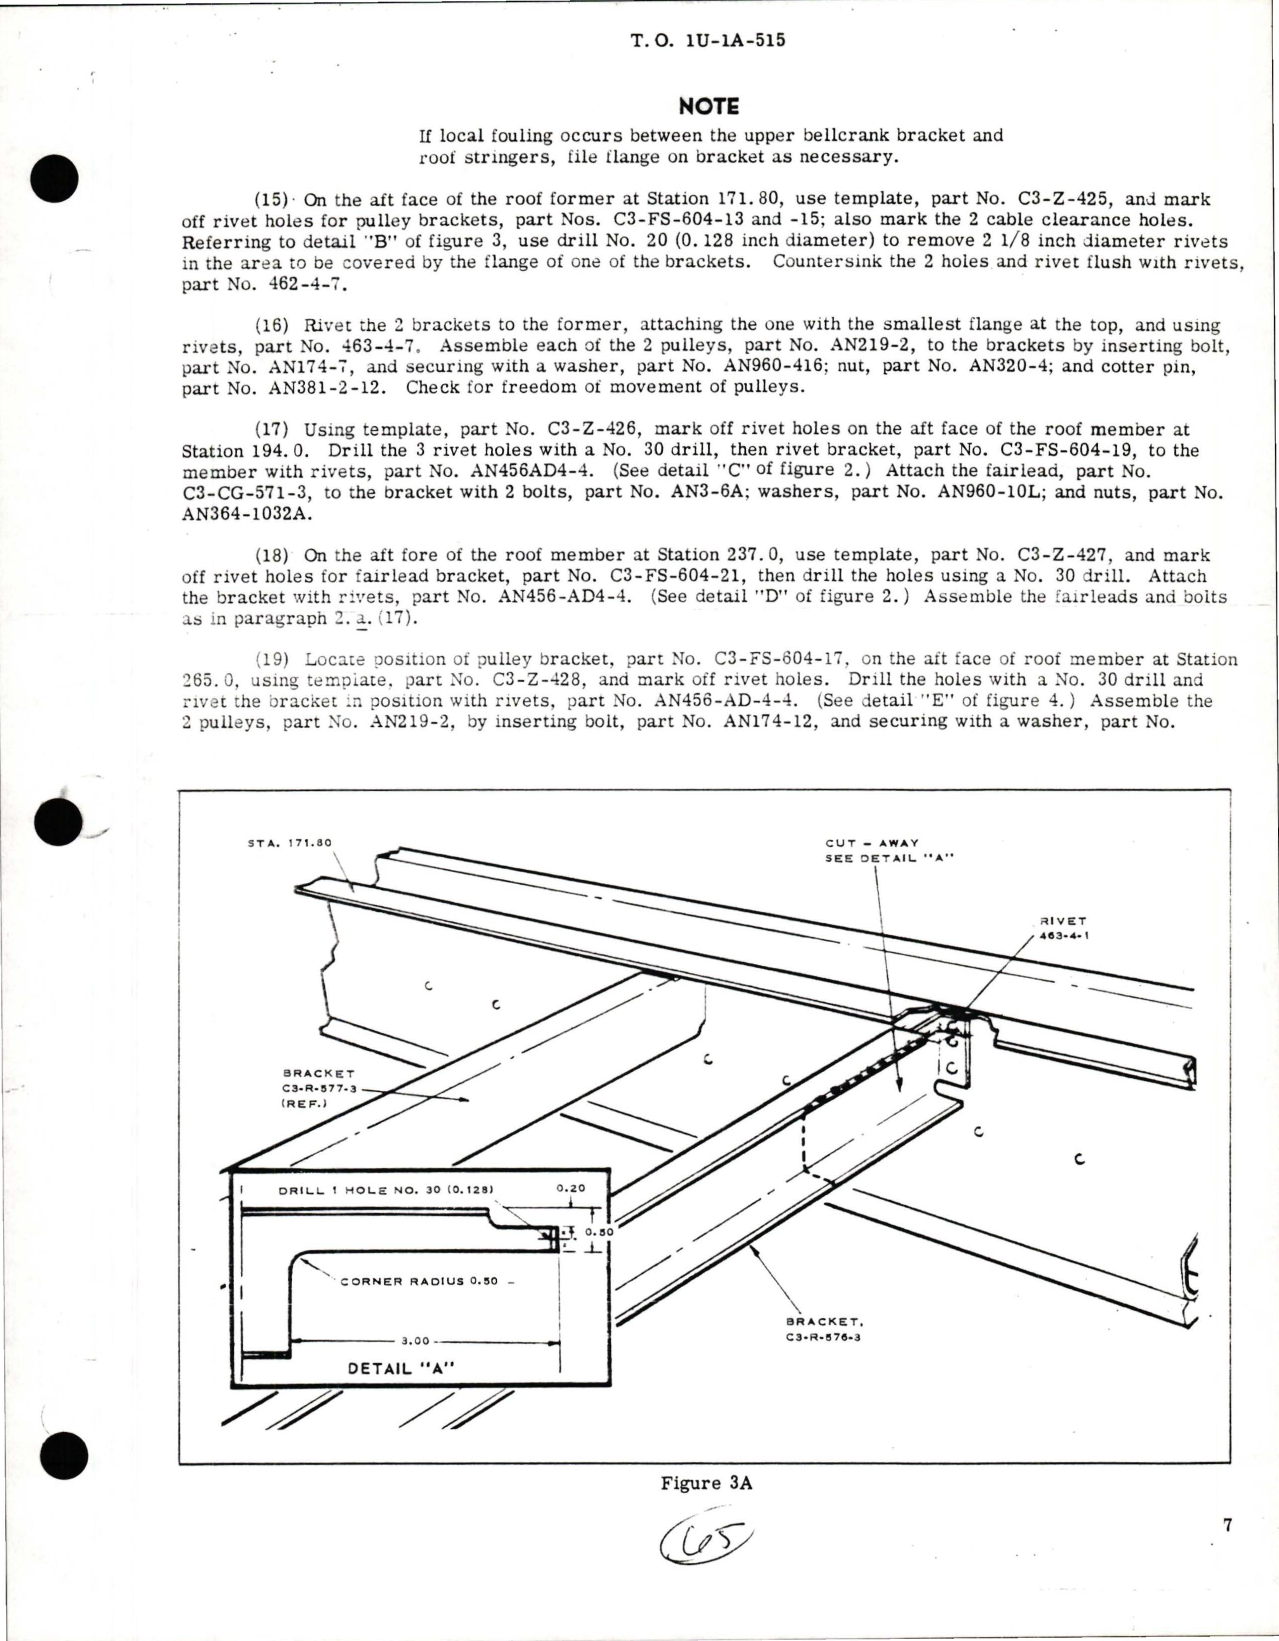 Sample page 7 from AirCorps Library document: Installation of Flap Operated Elevator Trim Tab on YU-1 and U-1A